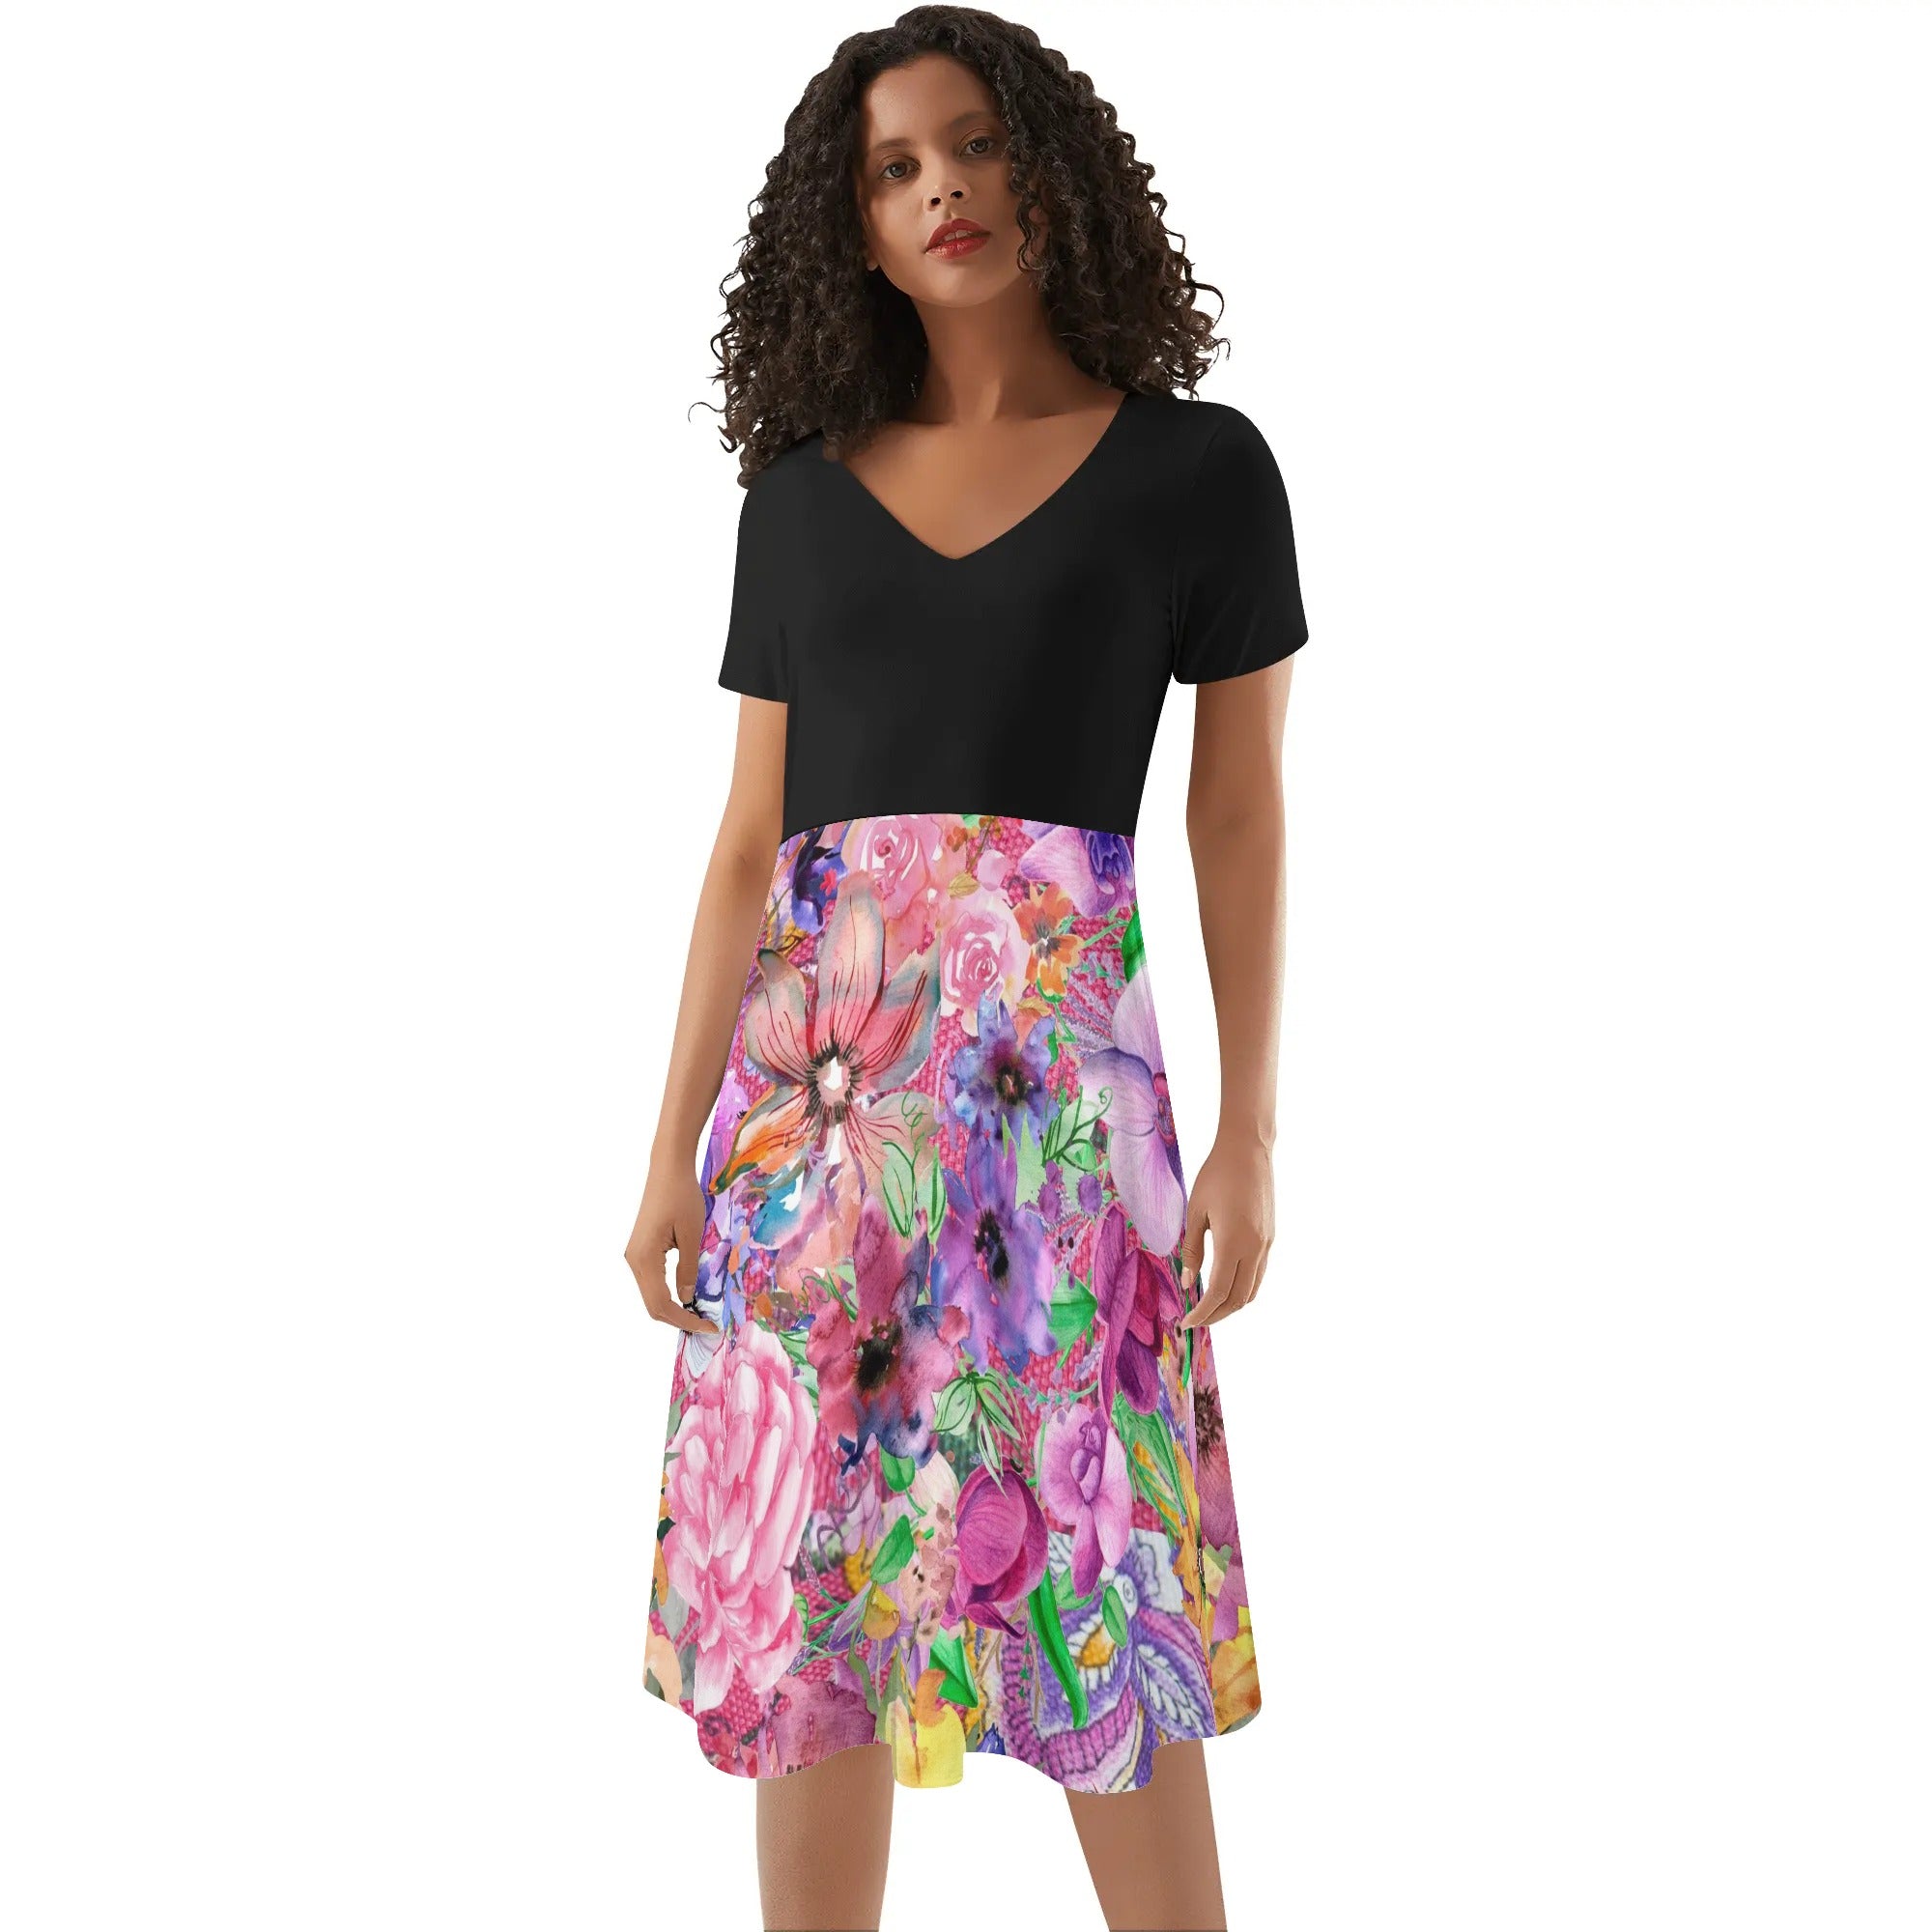 Nothing but Floral Womens Black Top Ruffle Summer Dress